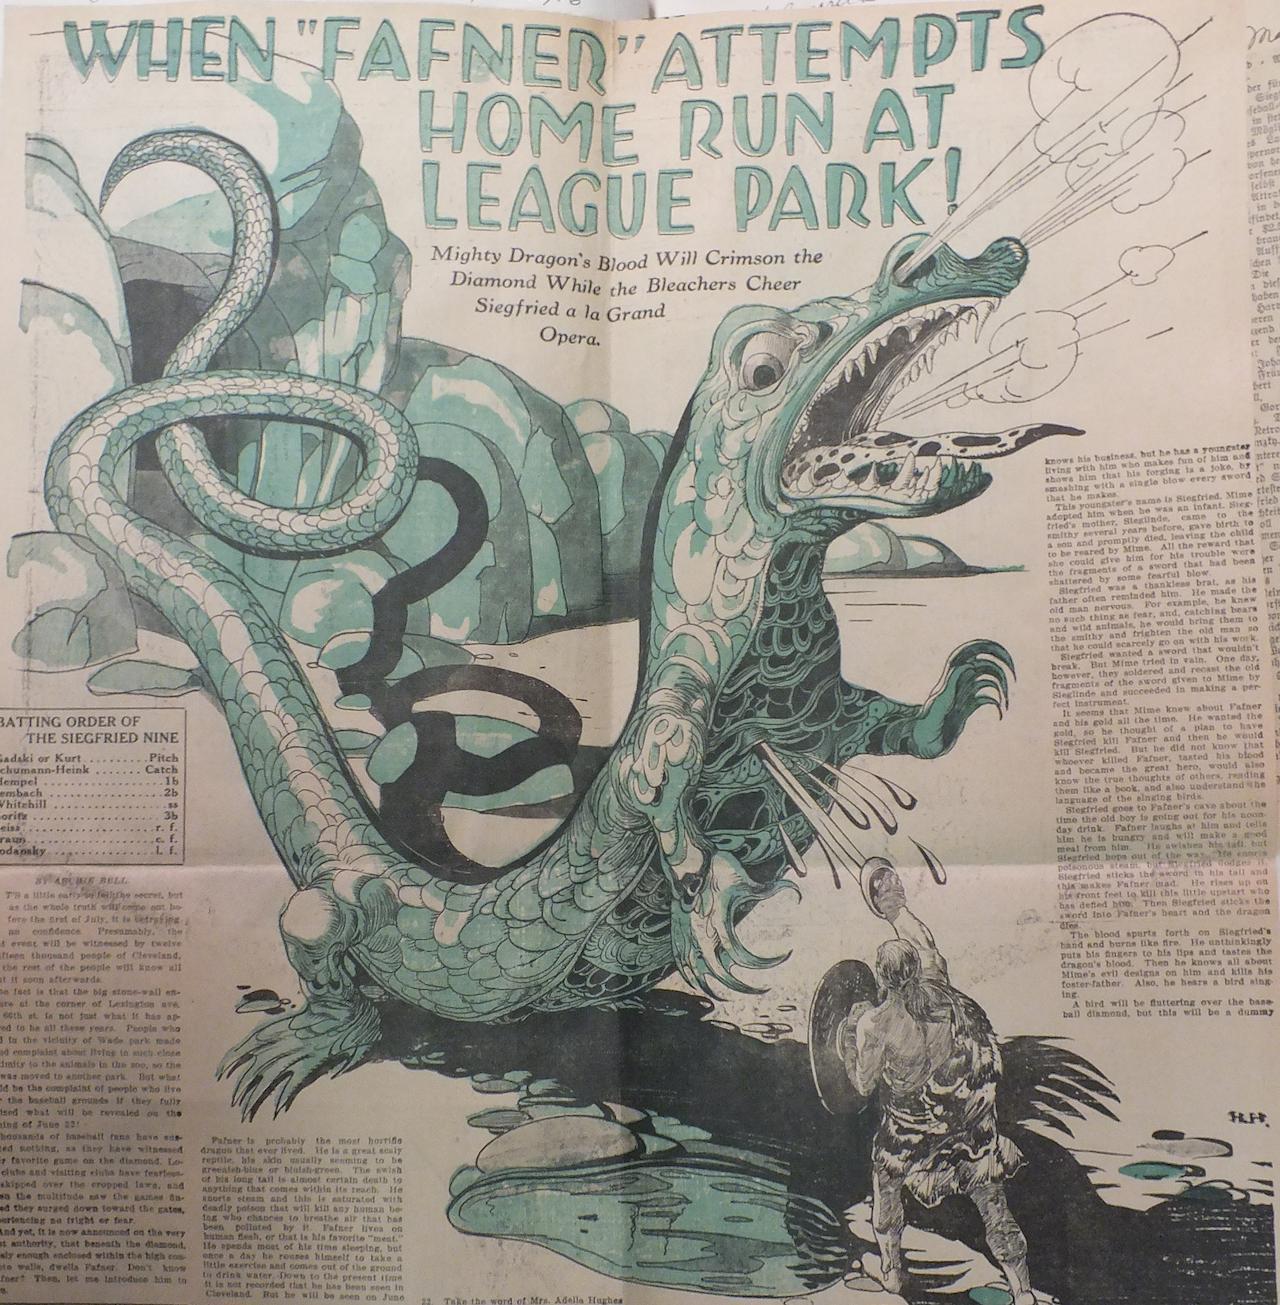 Illustration of Fafner and Siegfried printed in The Leader, 1916